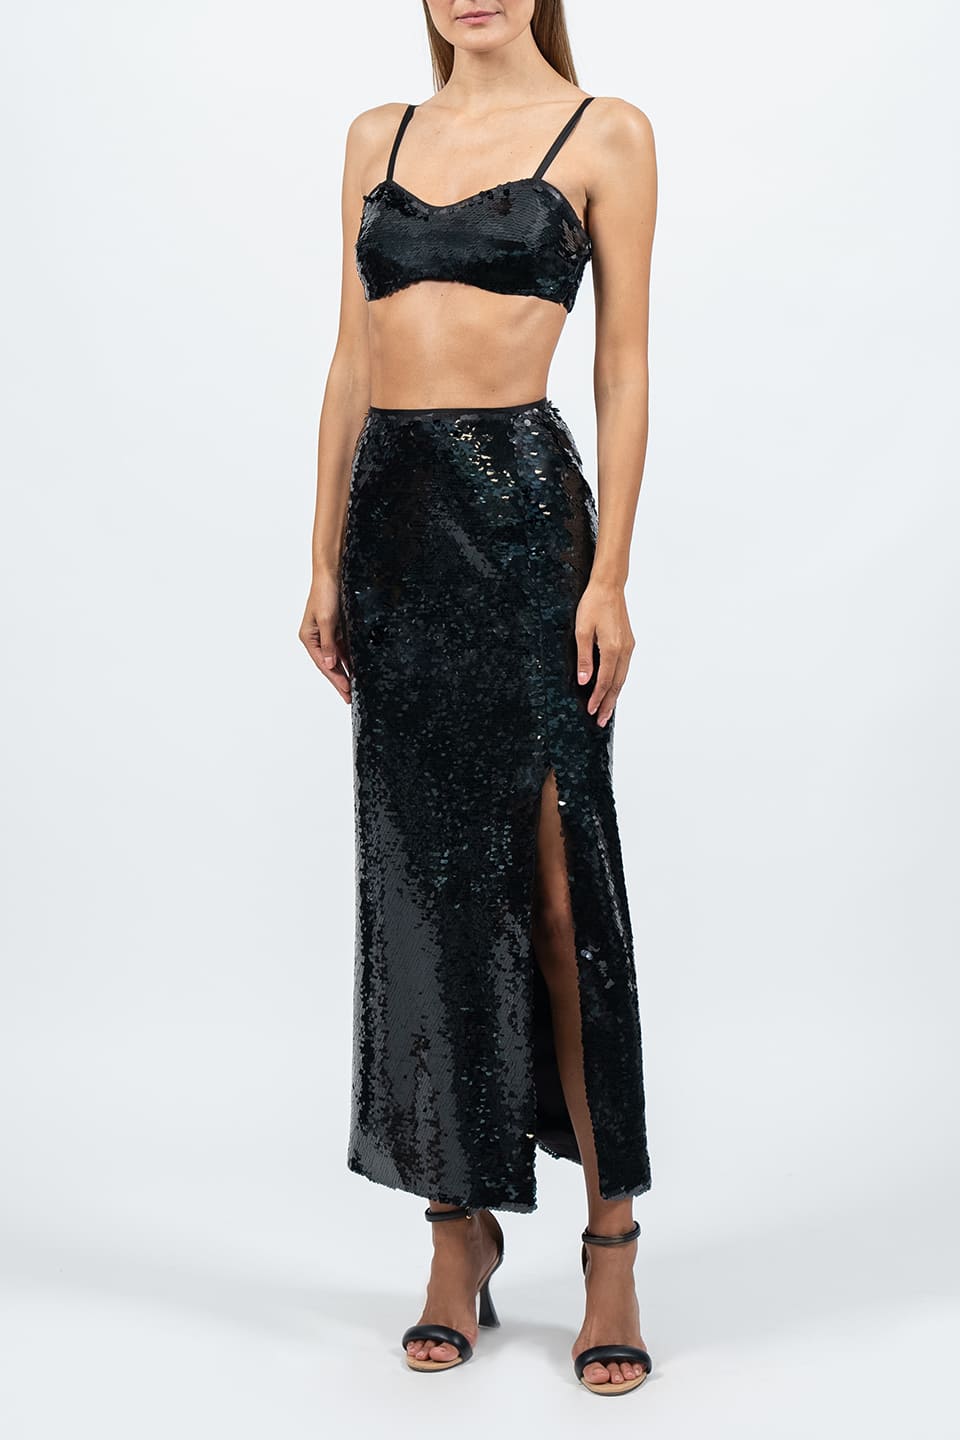 Shop online trendy Black Skirts from Federica Tosi Fashion designer. Product gallery 1